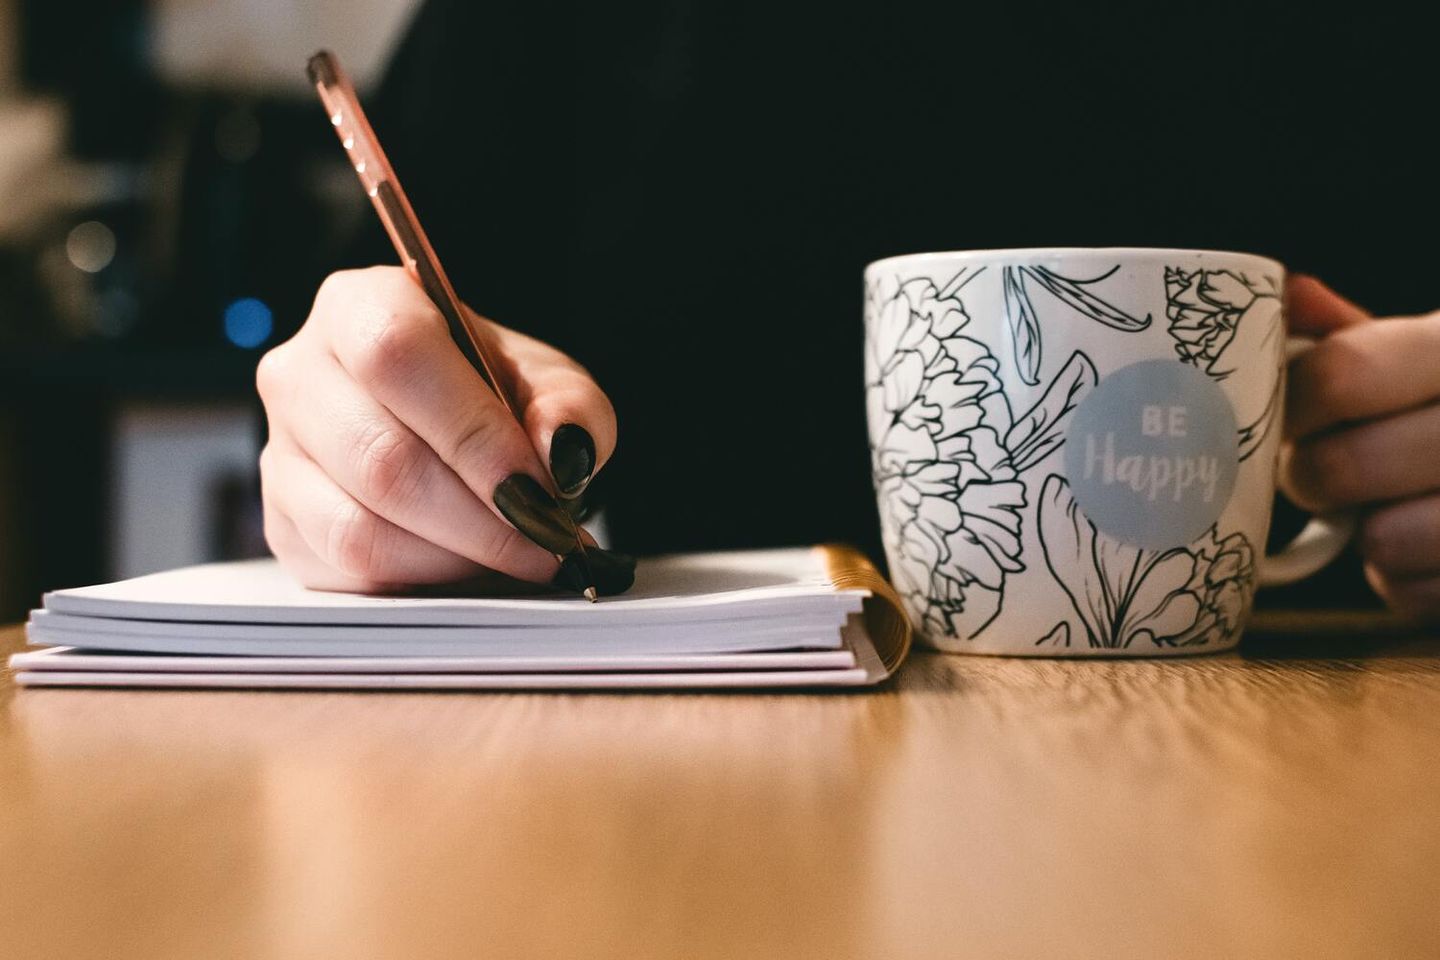 Freelance writer sitting at a desk, writing in a notebook while drinking from a mug